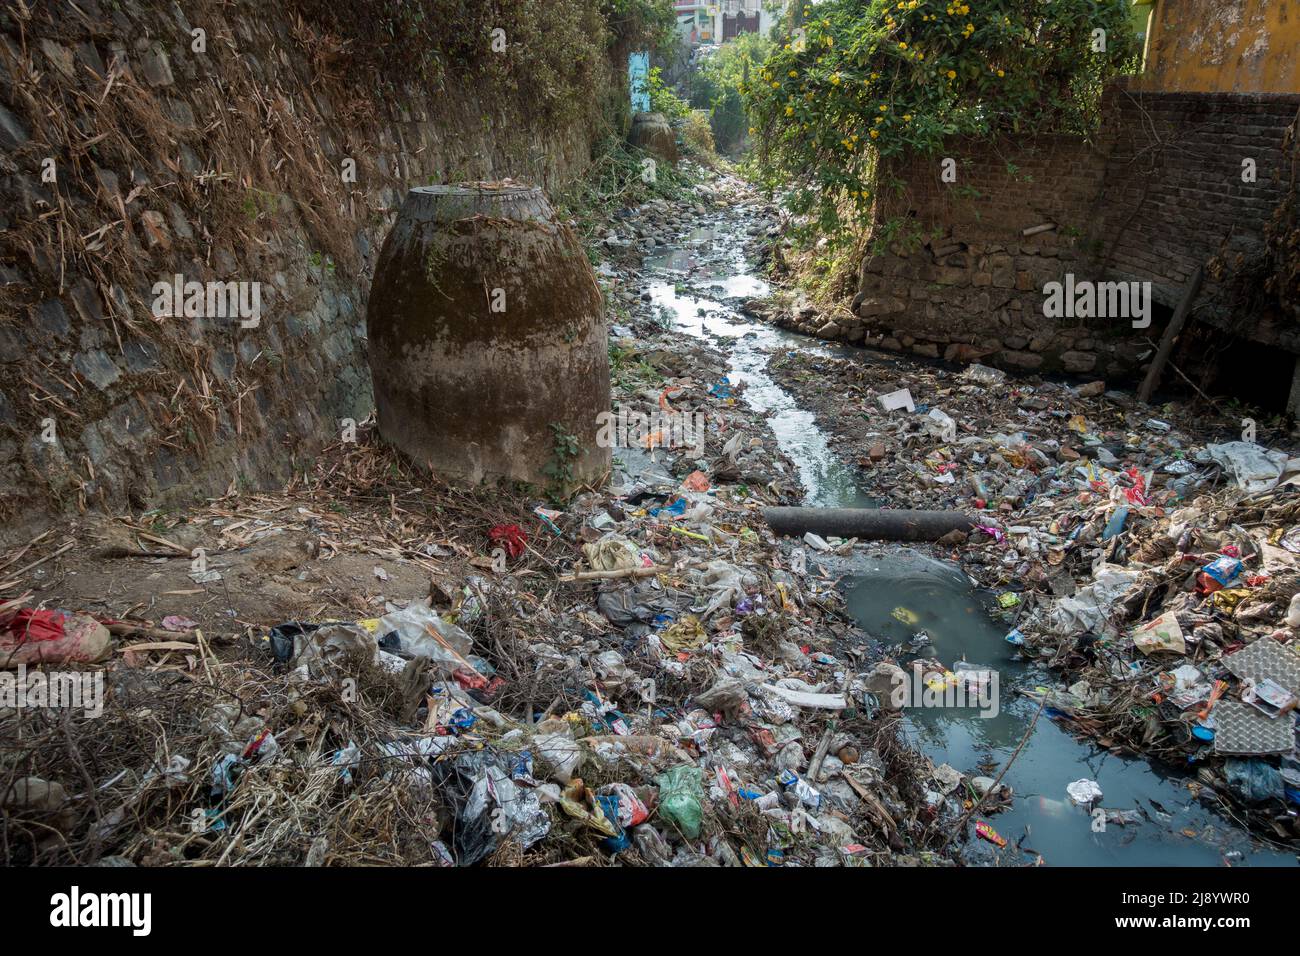 A sewer full of plastic and toxic waste flowing in open. Dehradun, uttarakhand India. Stock Photo